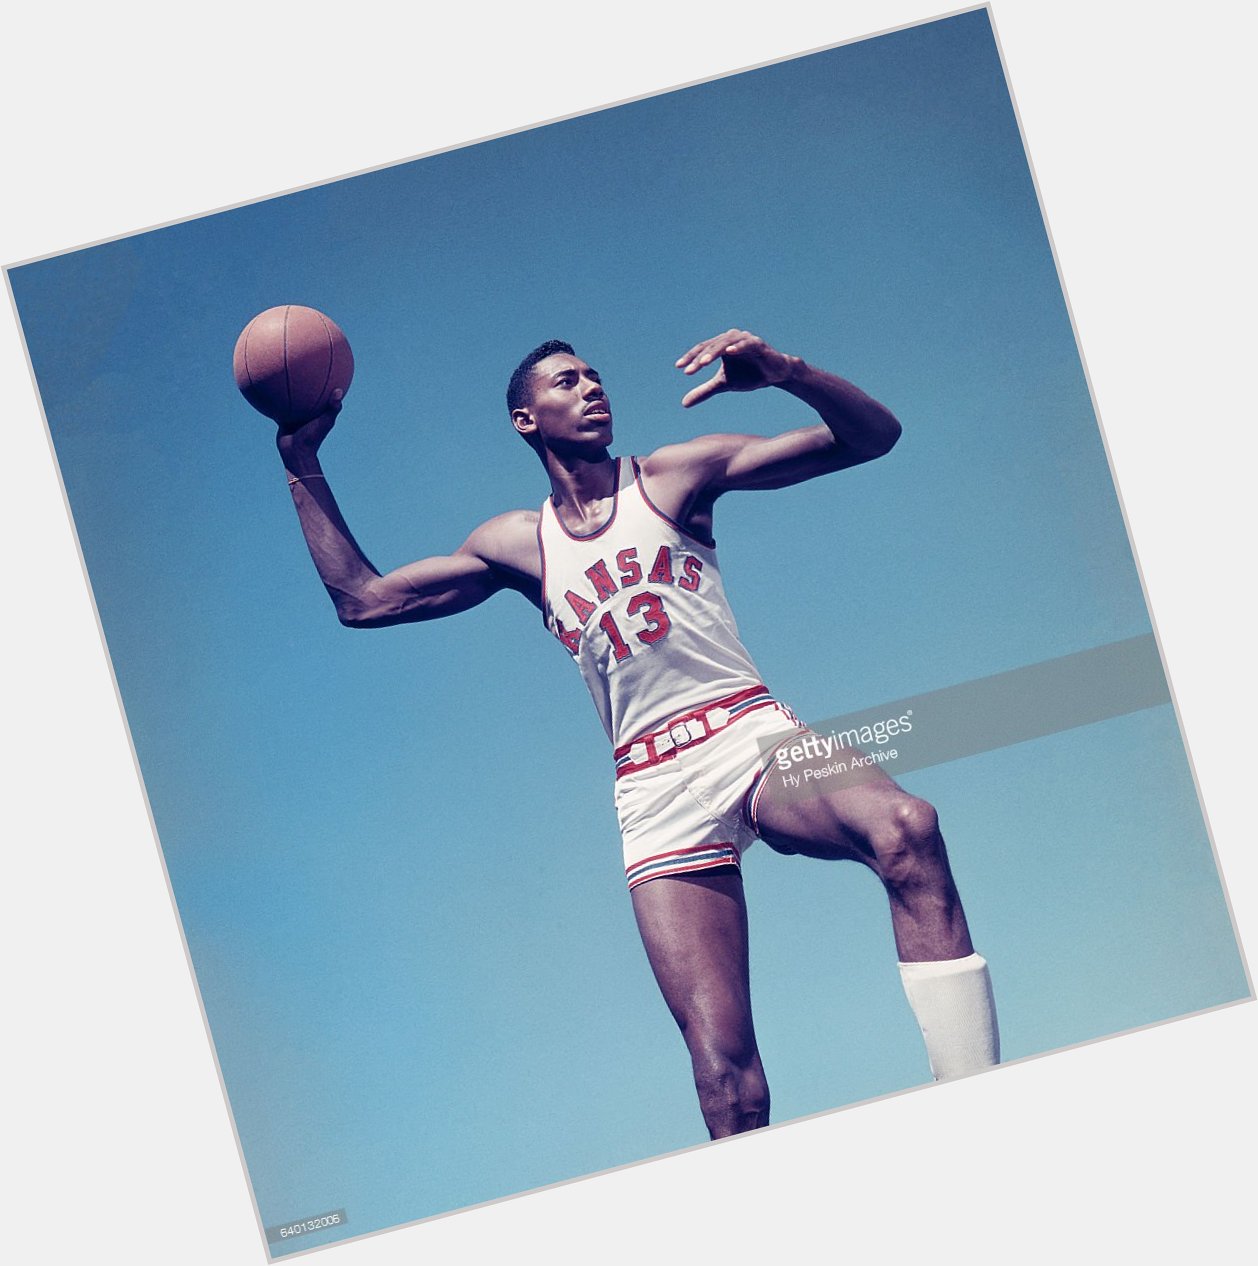 Happy Birthday to the late, great Wilt Chamberlain, who would have turned 81 years old today.  